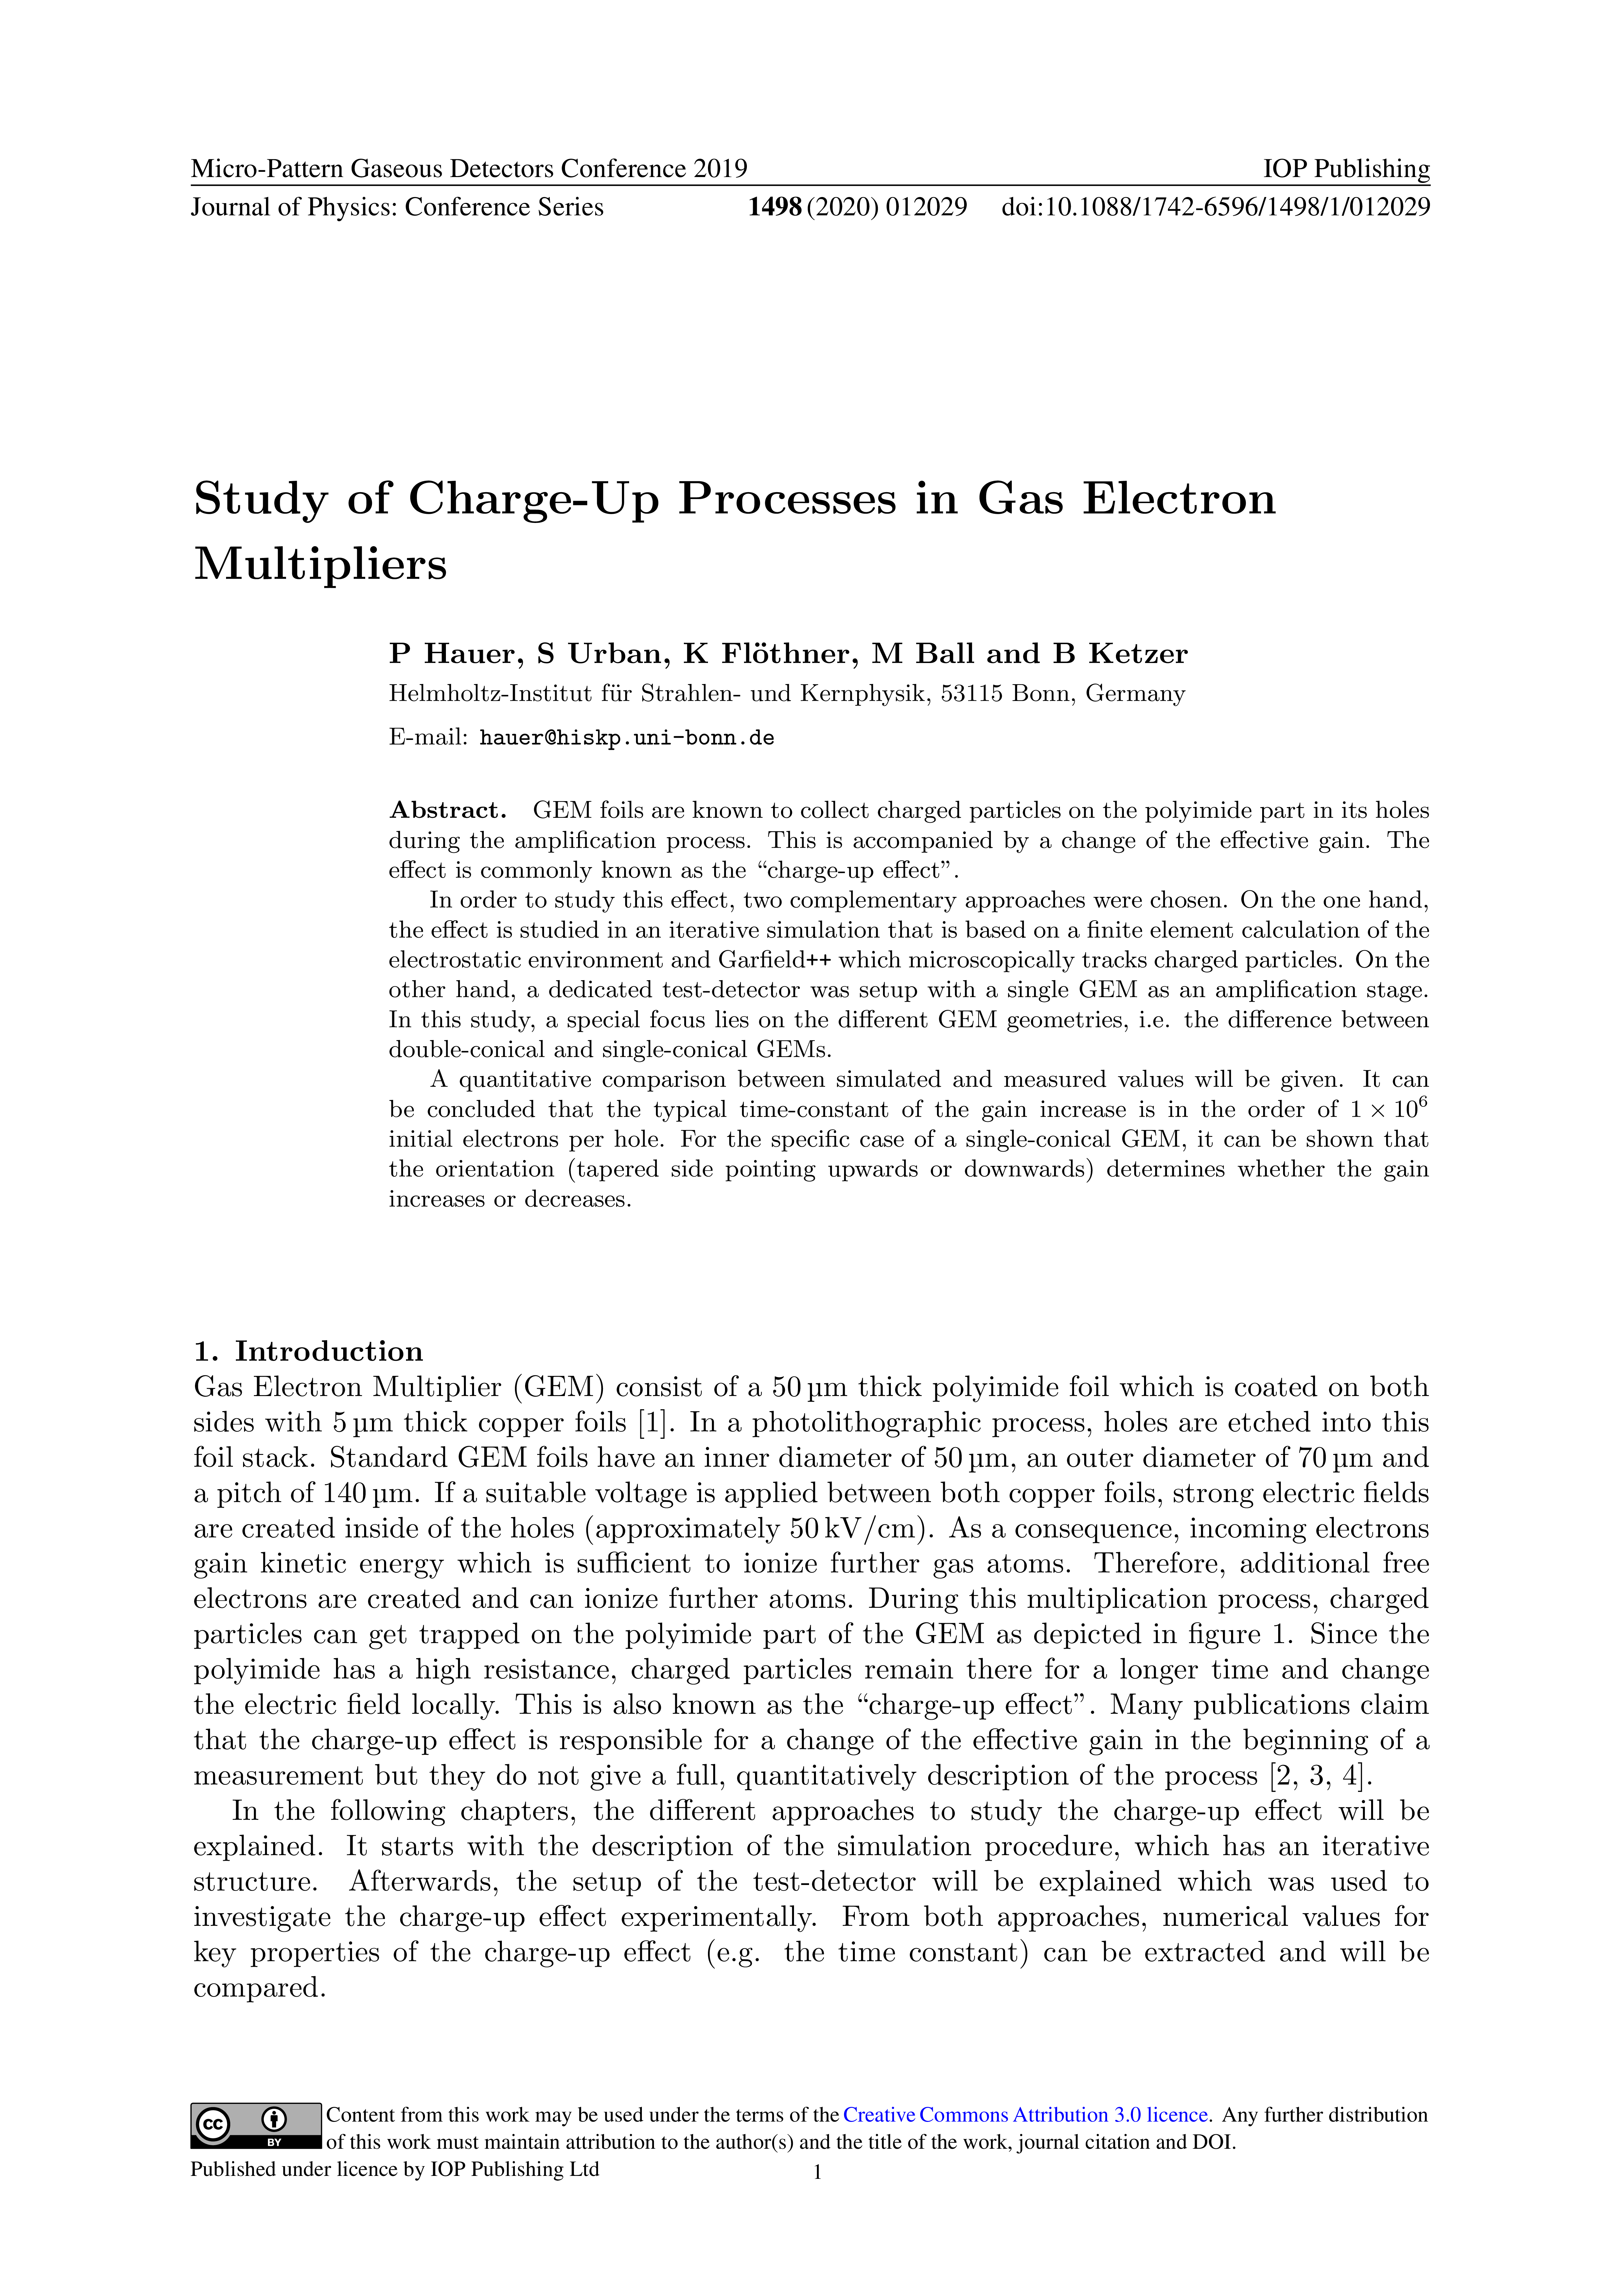 Study of Charge-Up Processes in Gas Electron Multipliers